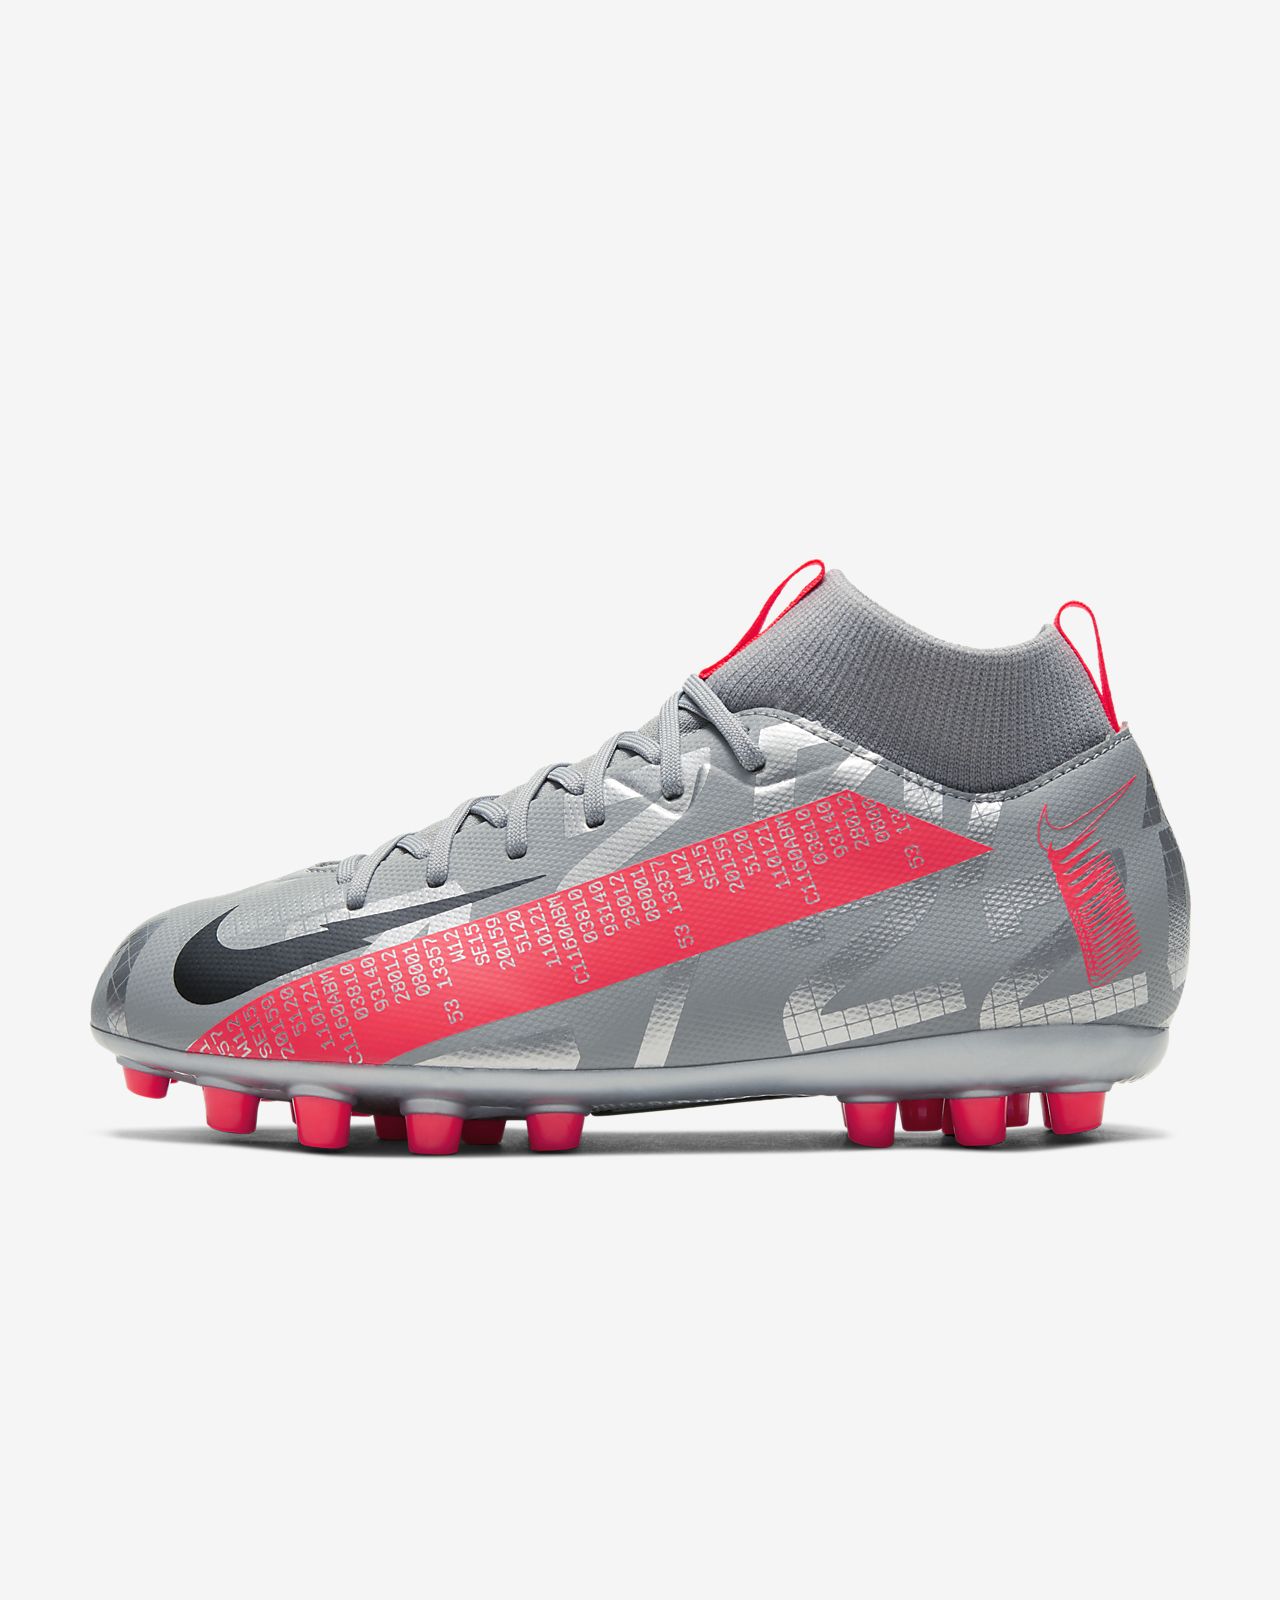 NIKE JR SUPERFLY X 6 ACADEMY GS TF White cool gray.